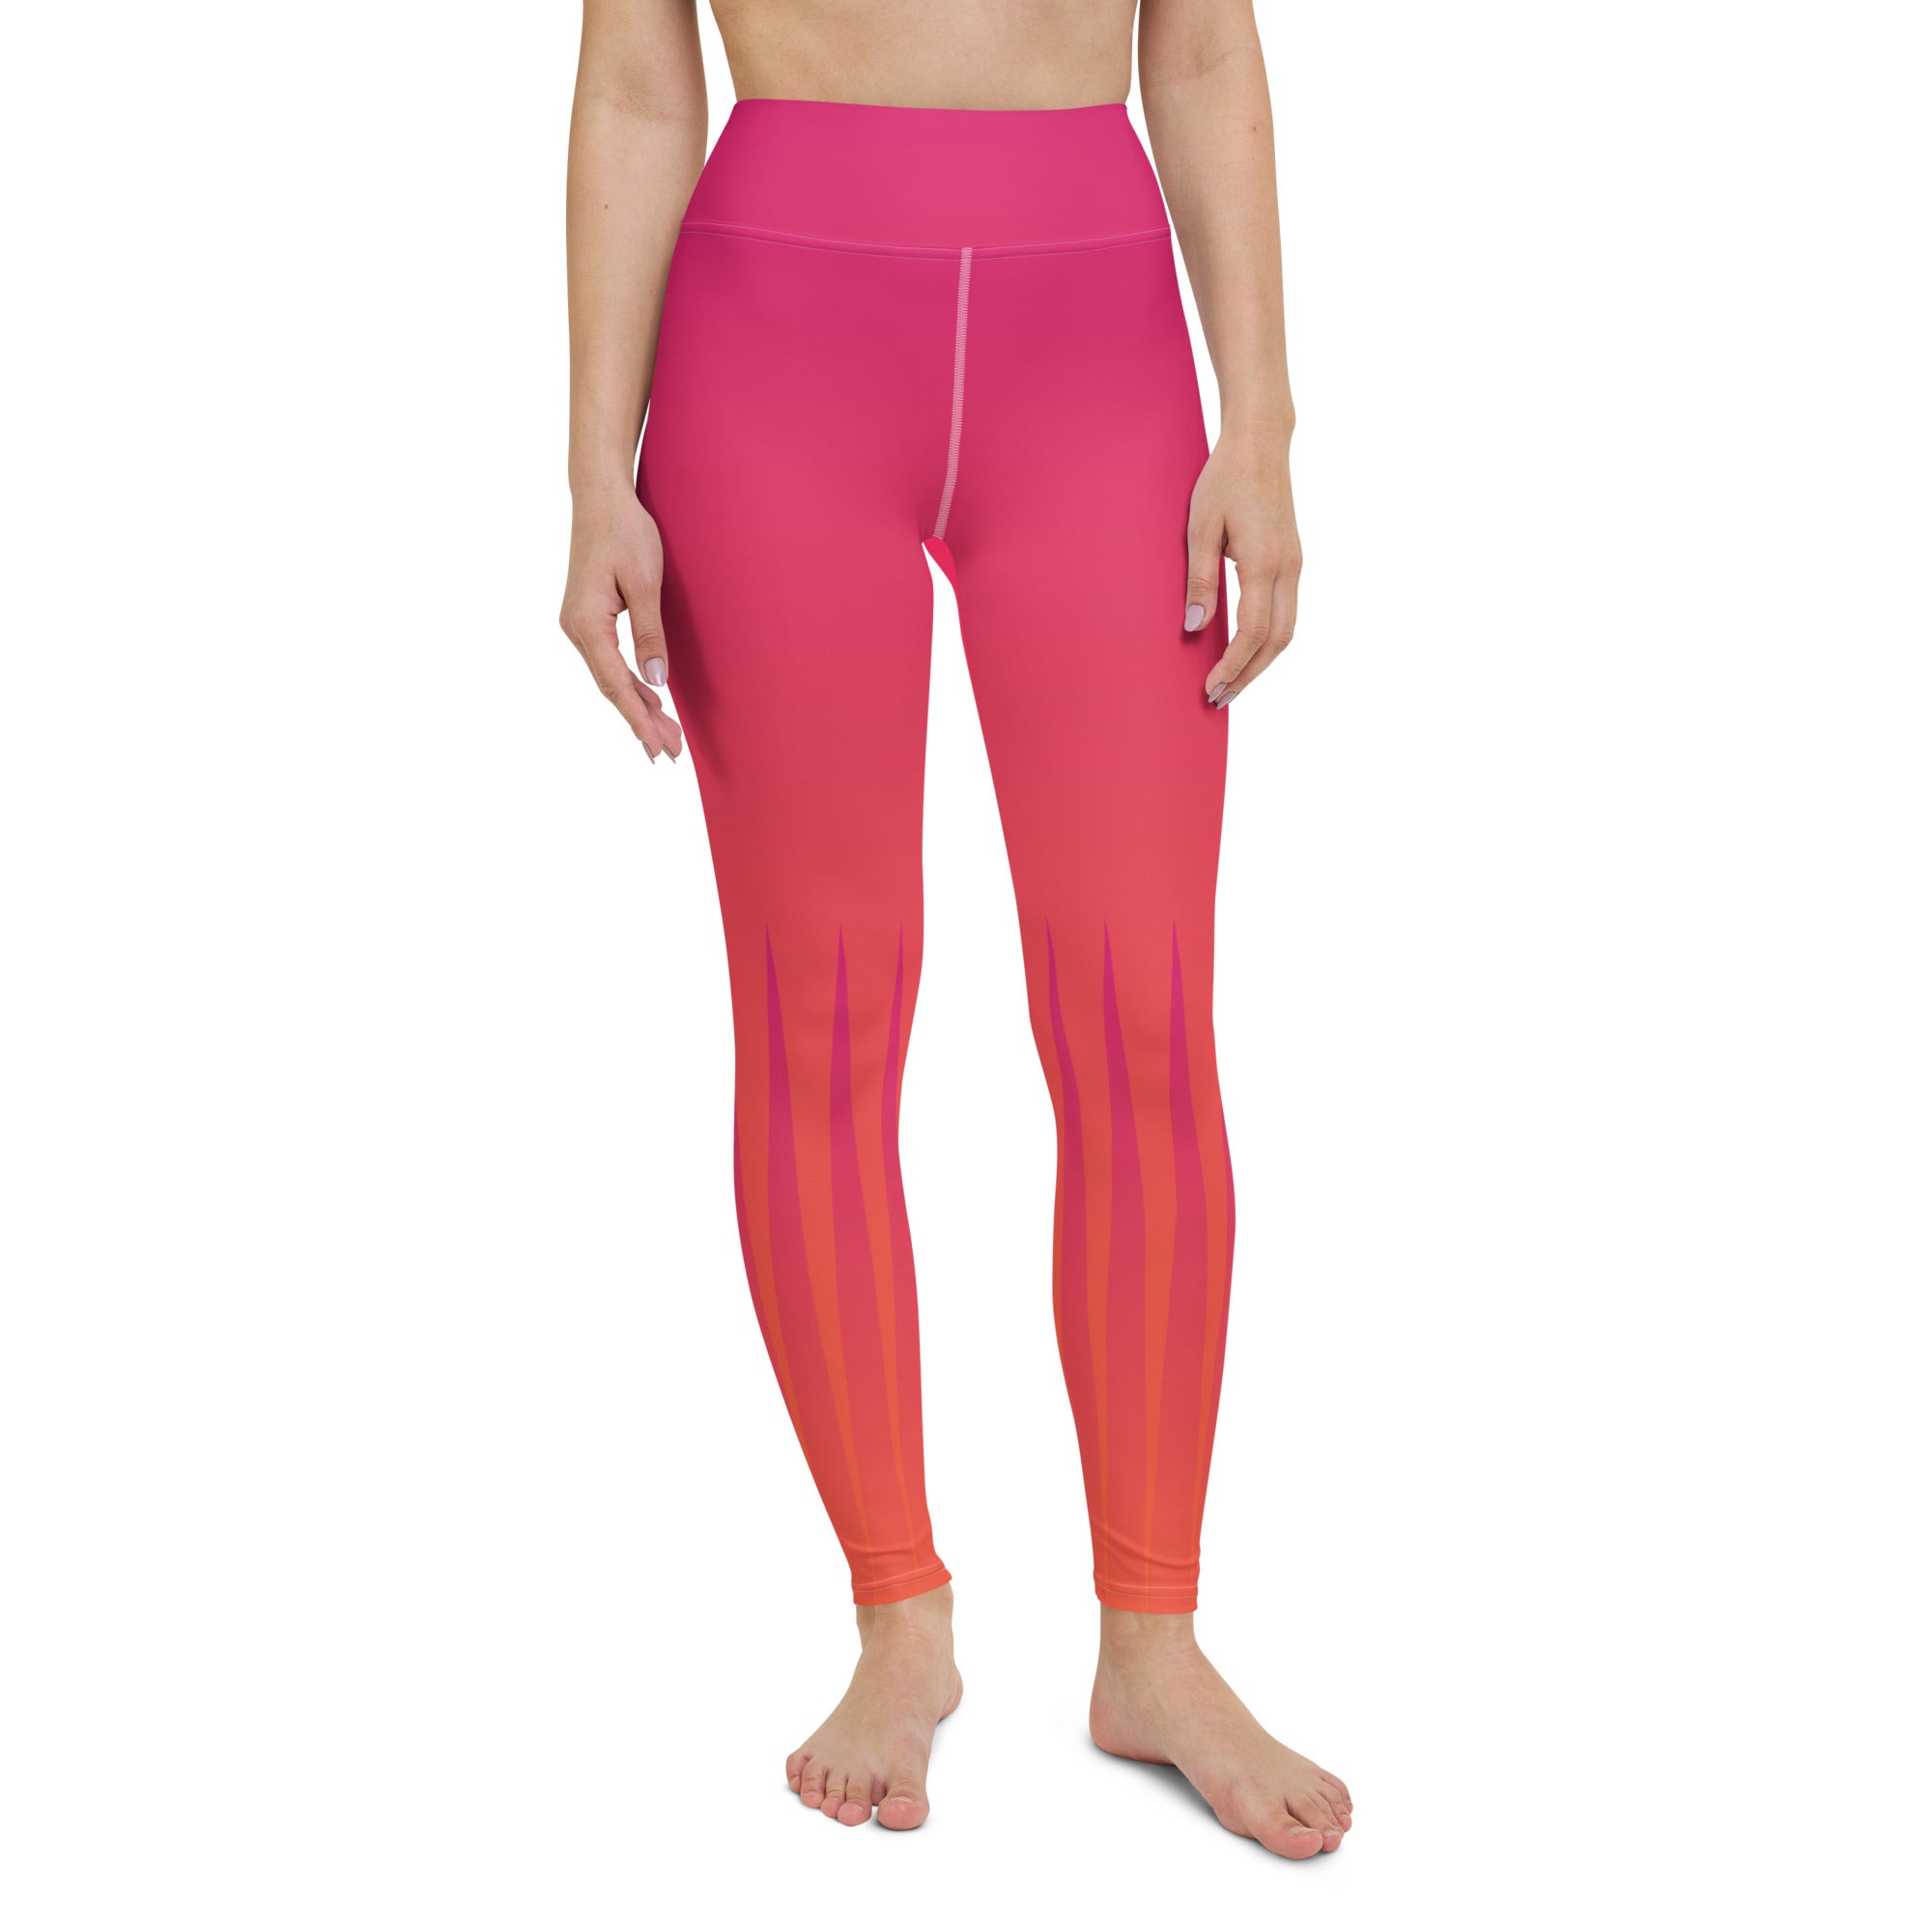 Flow through your poses inspired by the serene beauty of the desert at dusk in these vibrant yoga leggings.